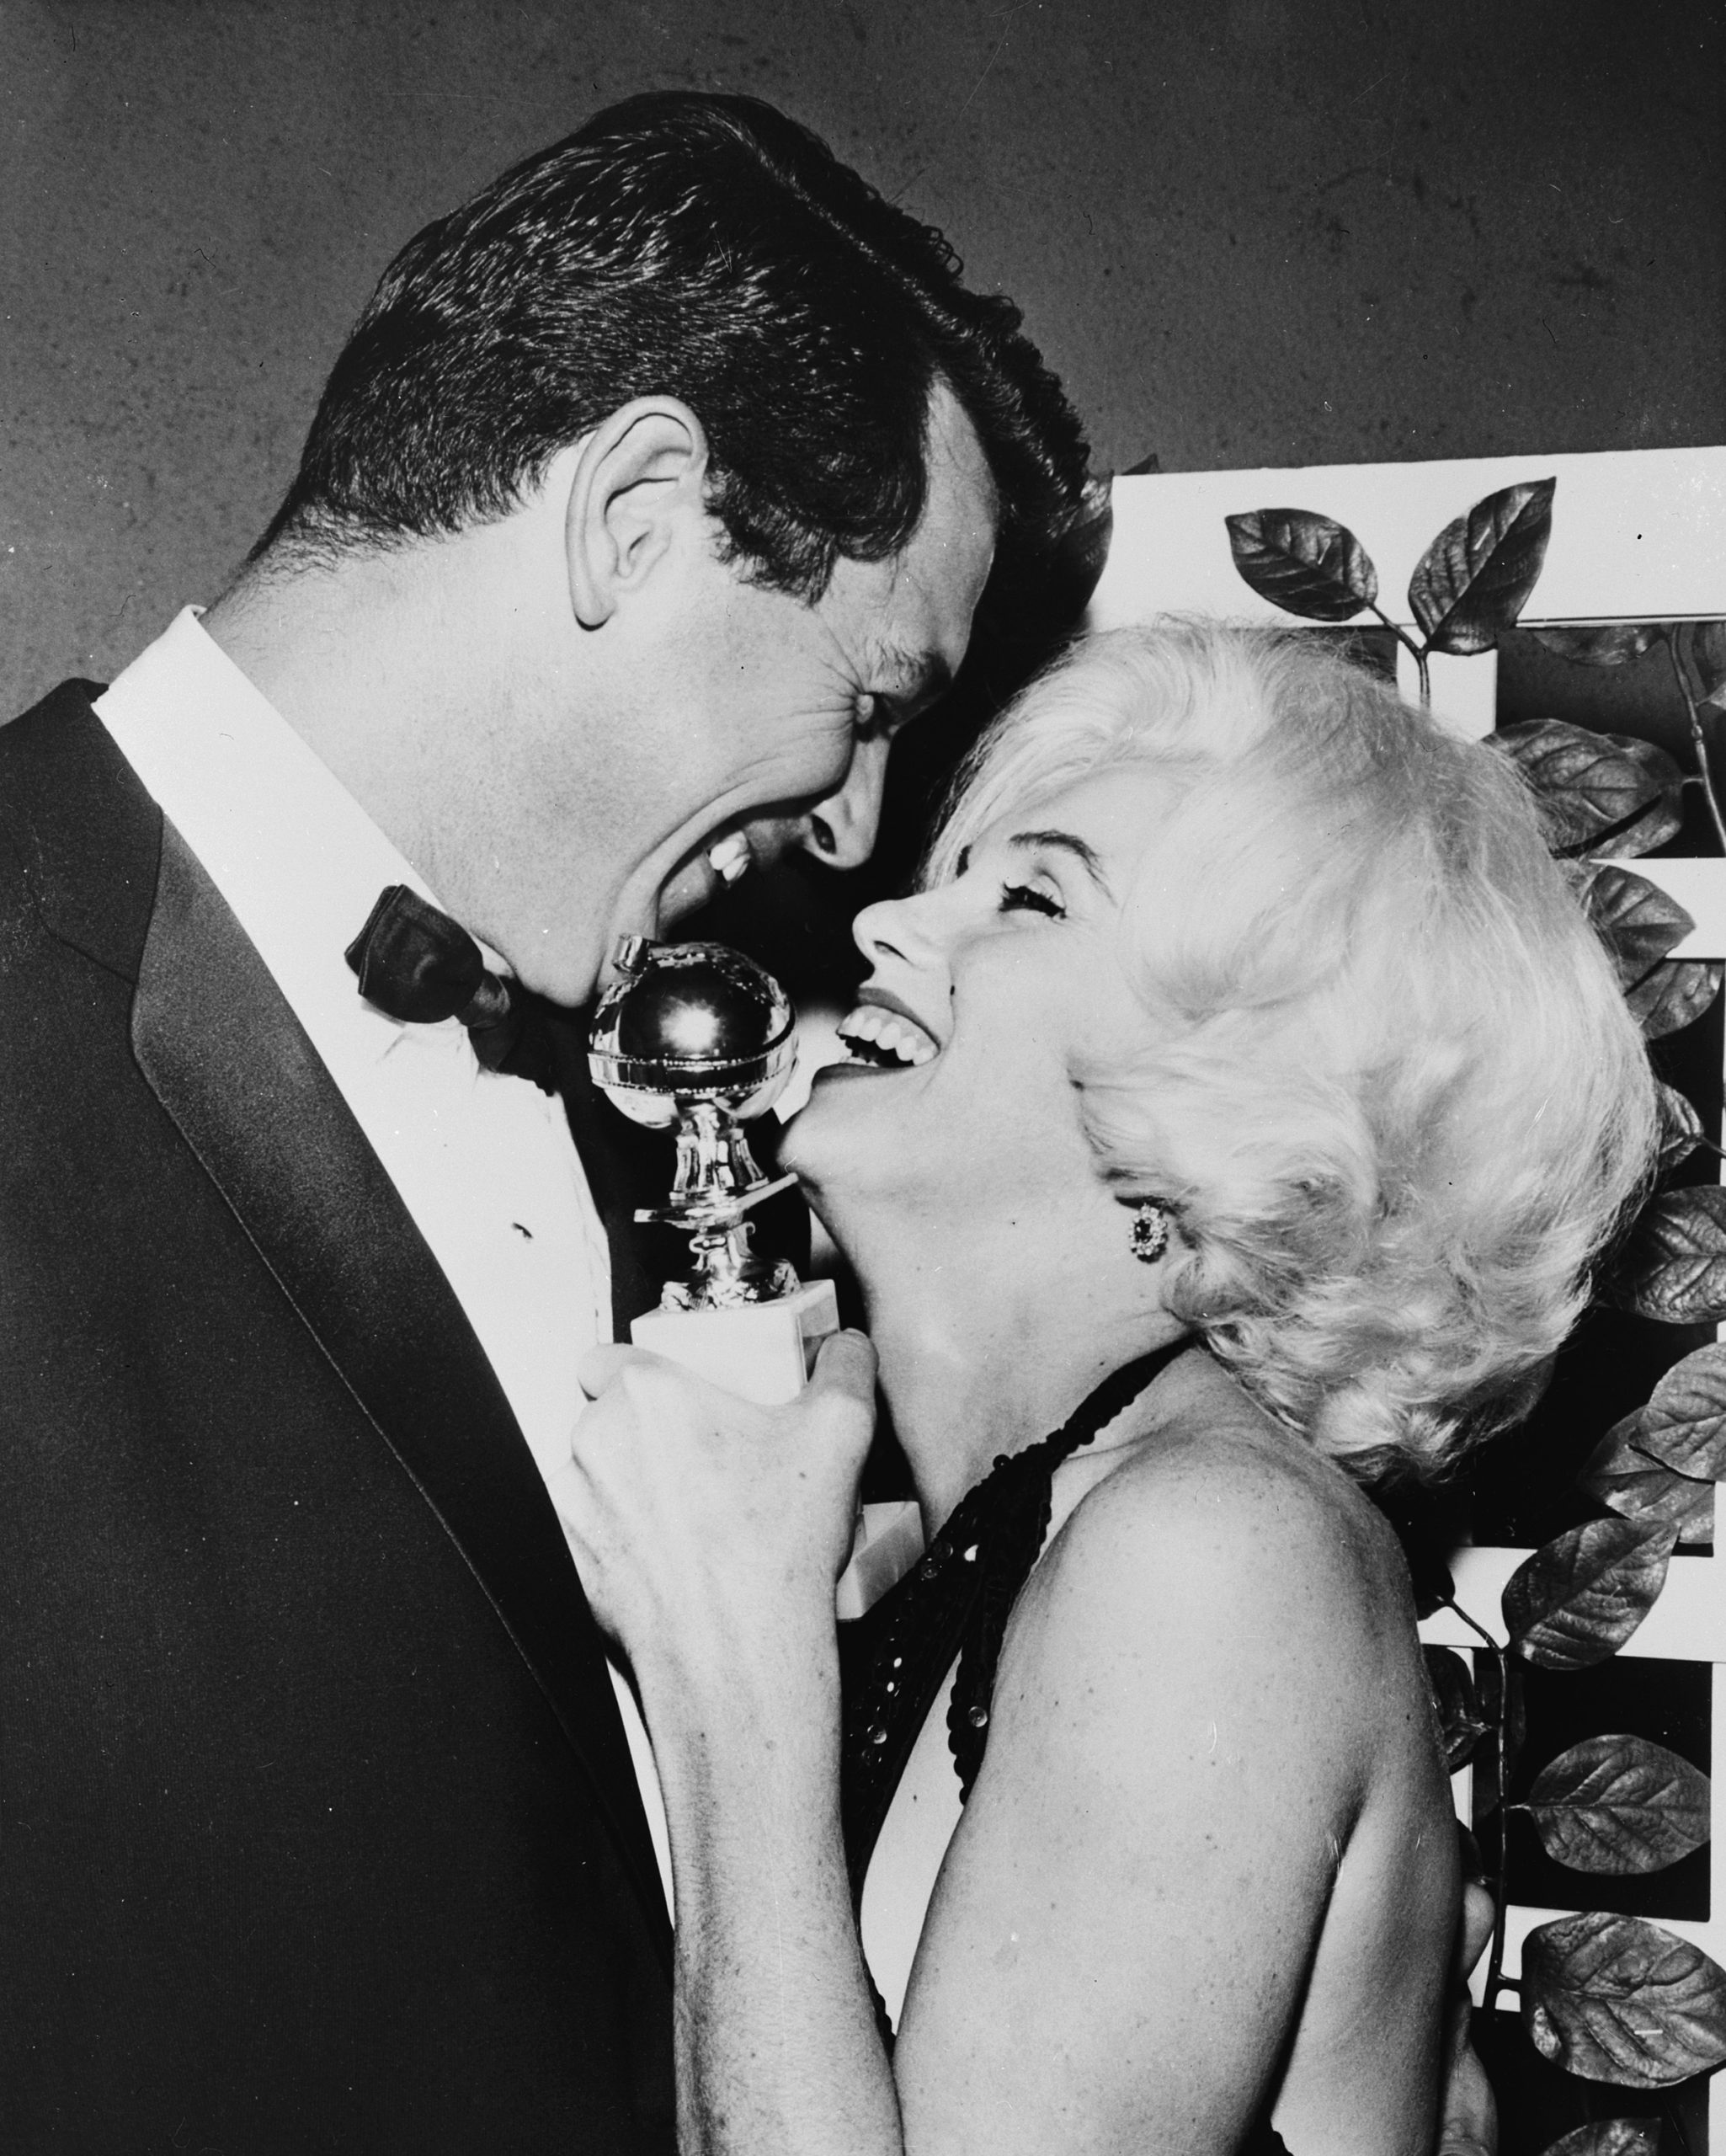 Marilyn Monroe and Rock Hudson at the 1962 Golden Globes